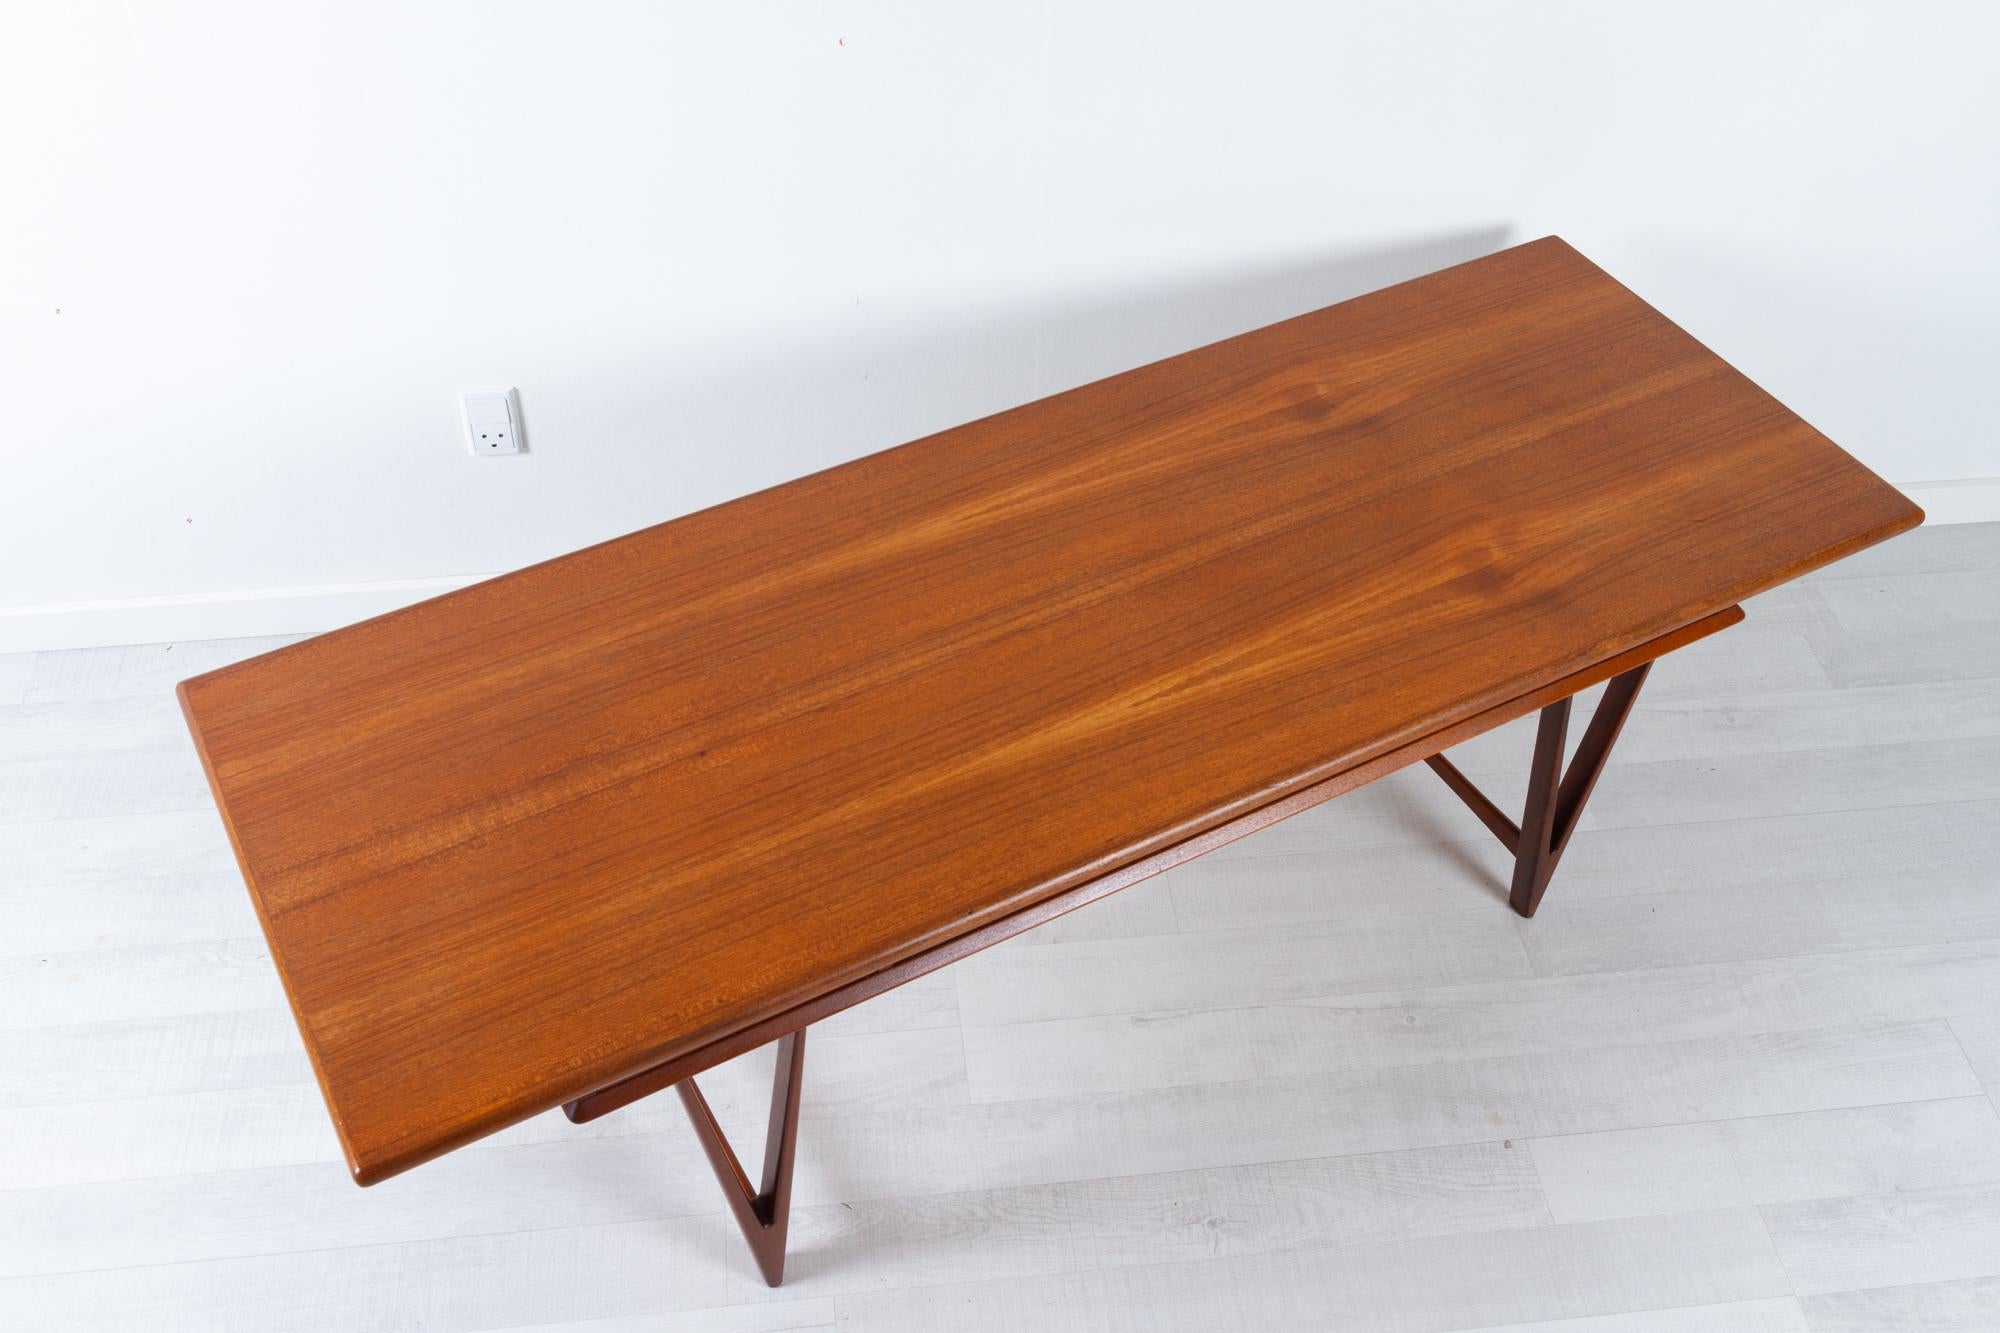 Vintage Danish Teak Coffee Table by E.W. Bach 1960s For Sale 2